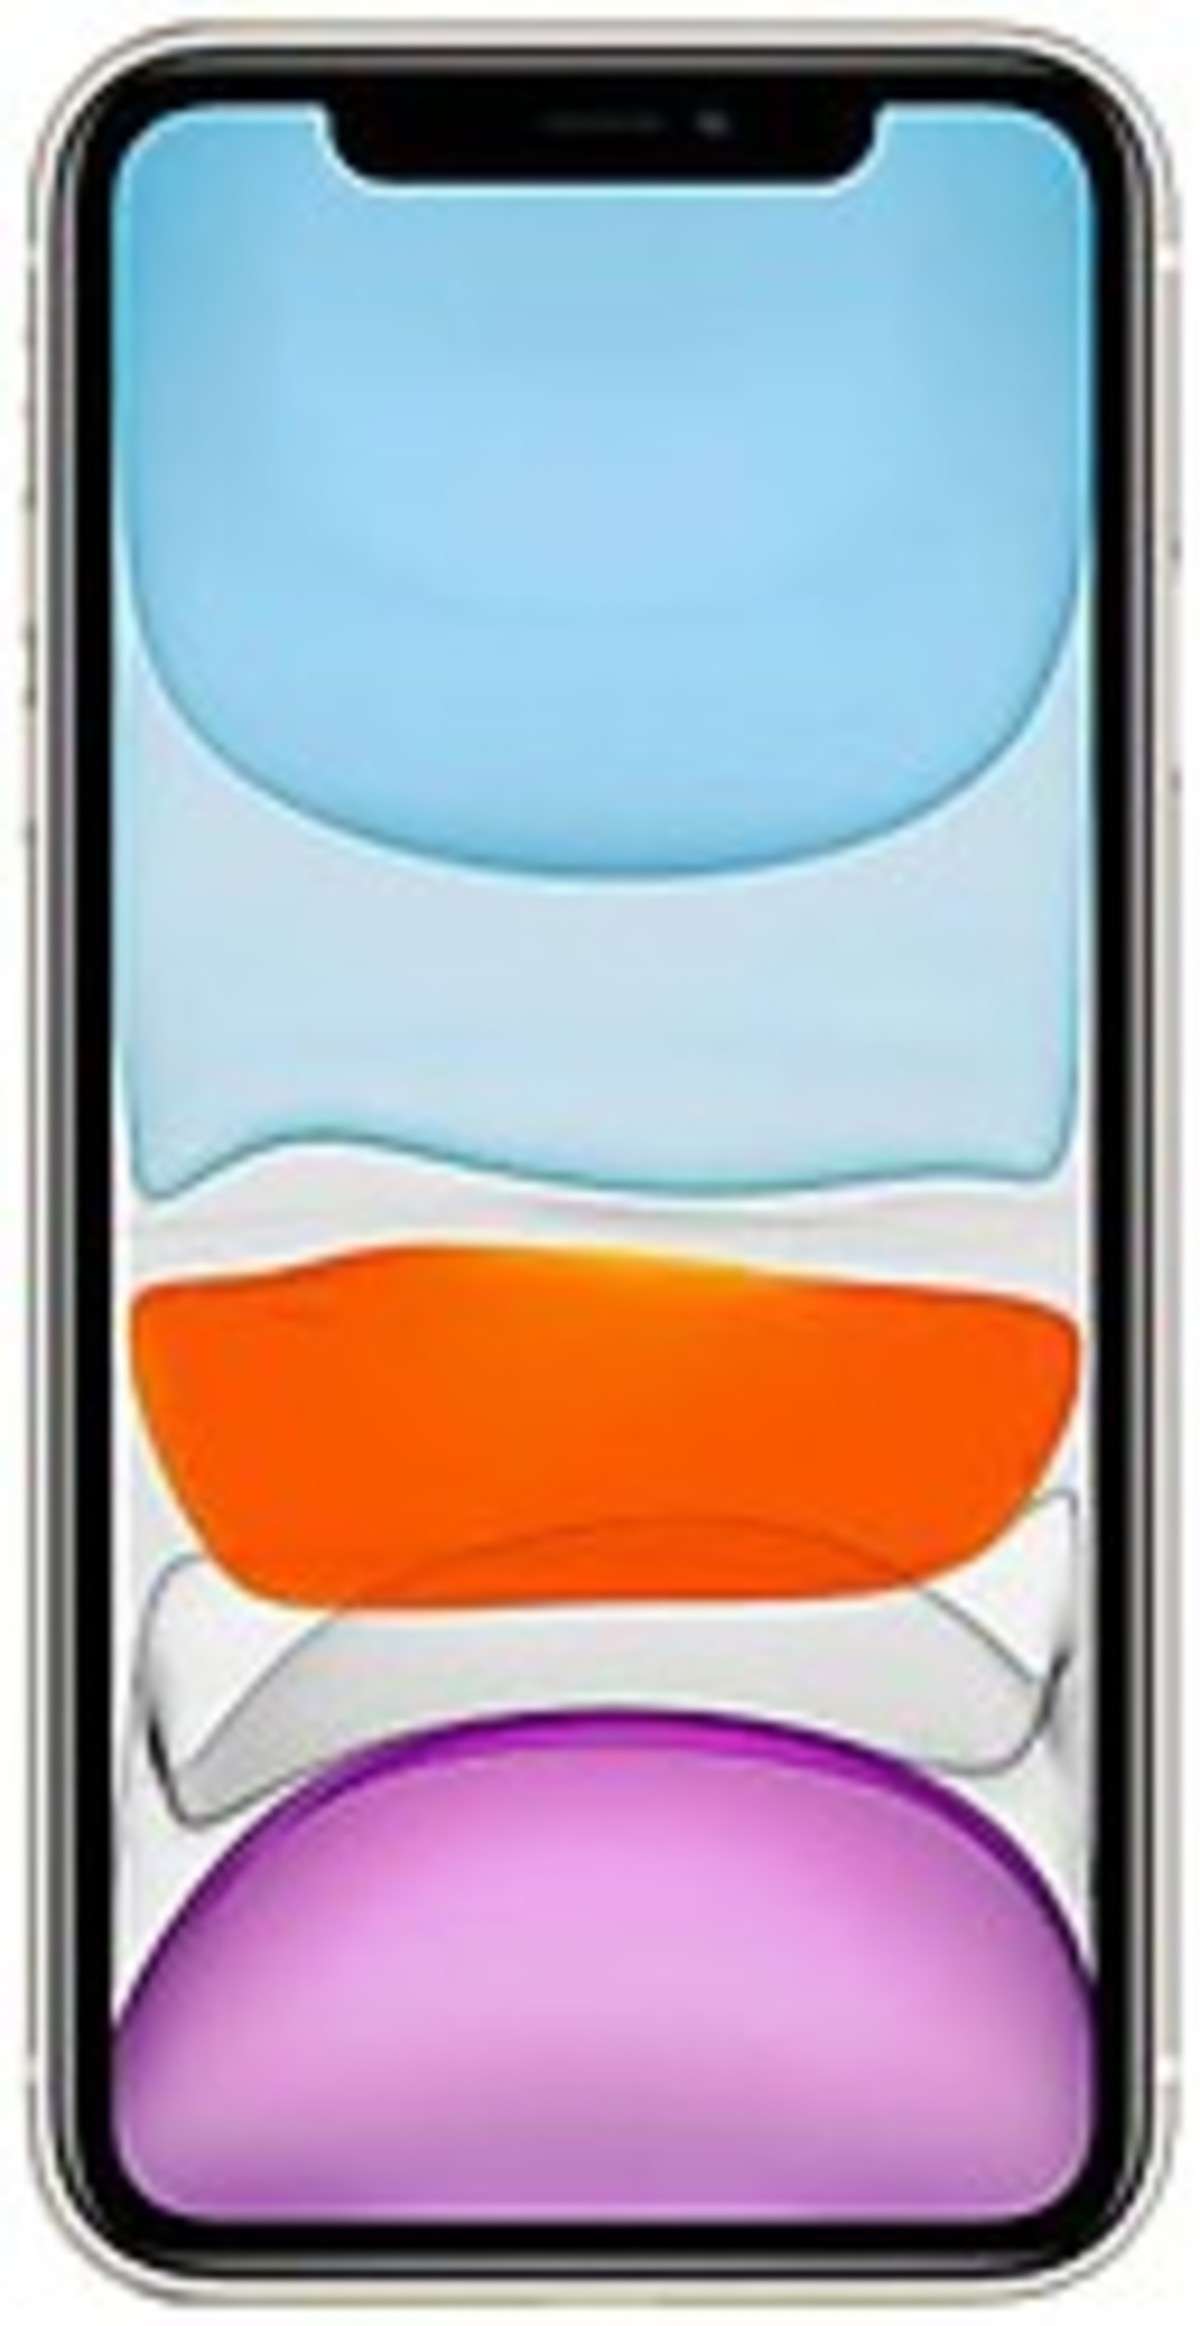 Apple Iphone 11 128gb White 4gb Ram Price In India Full Specifications 24th Sep 22 At Gadgets Now